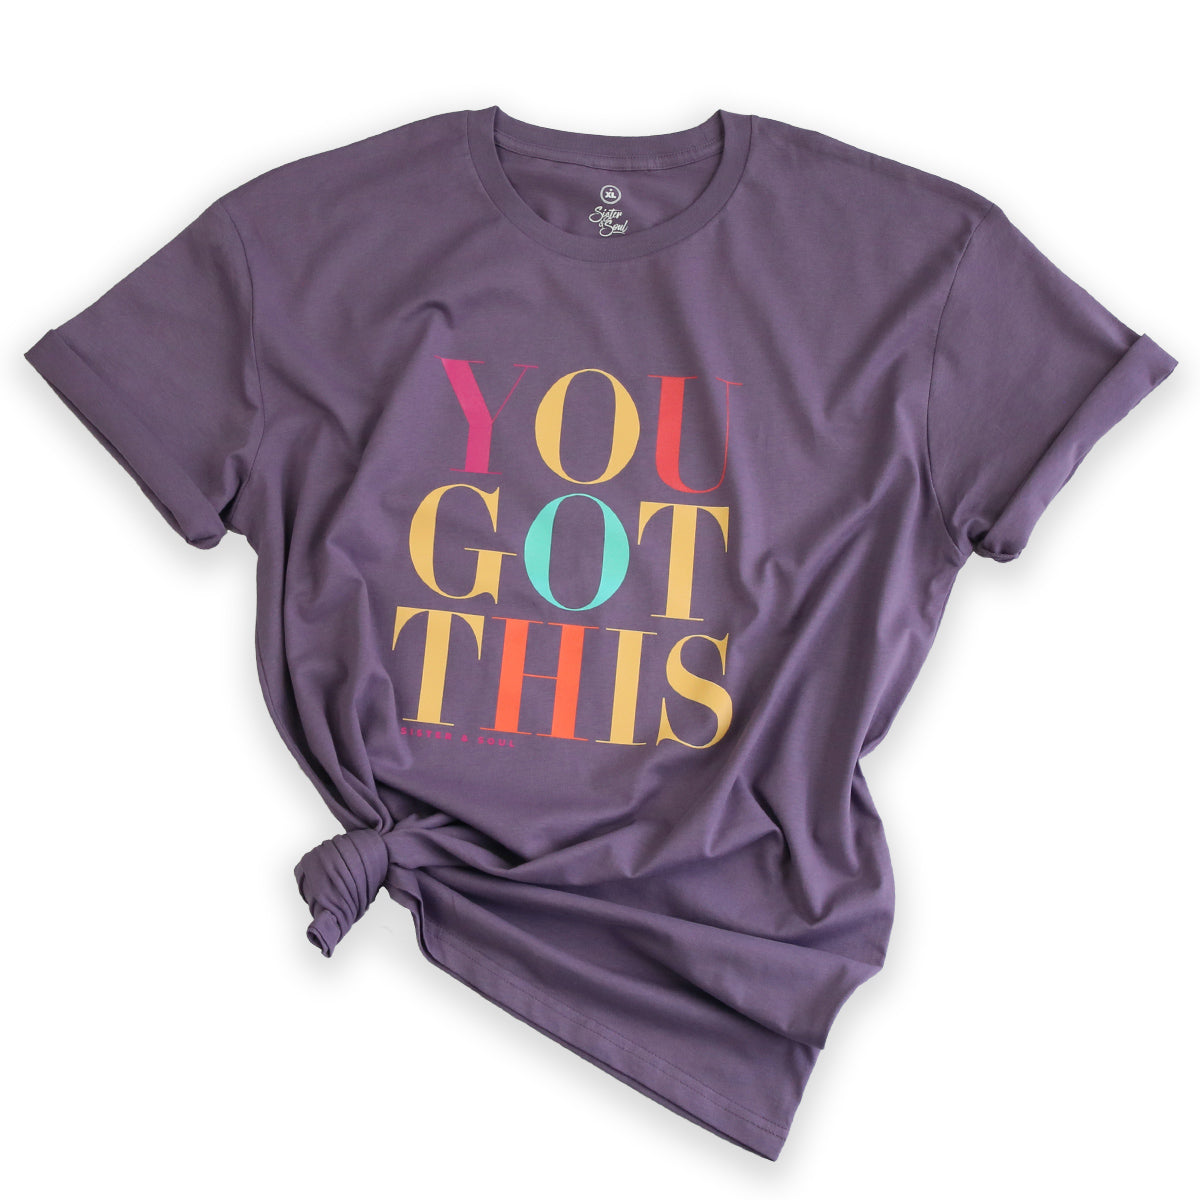 YOU GOT THIS - Plus Size Long Boxy Tee - Dusty Purple with Colourful Print